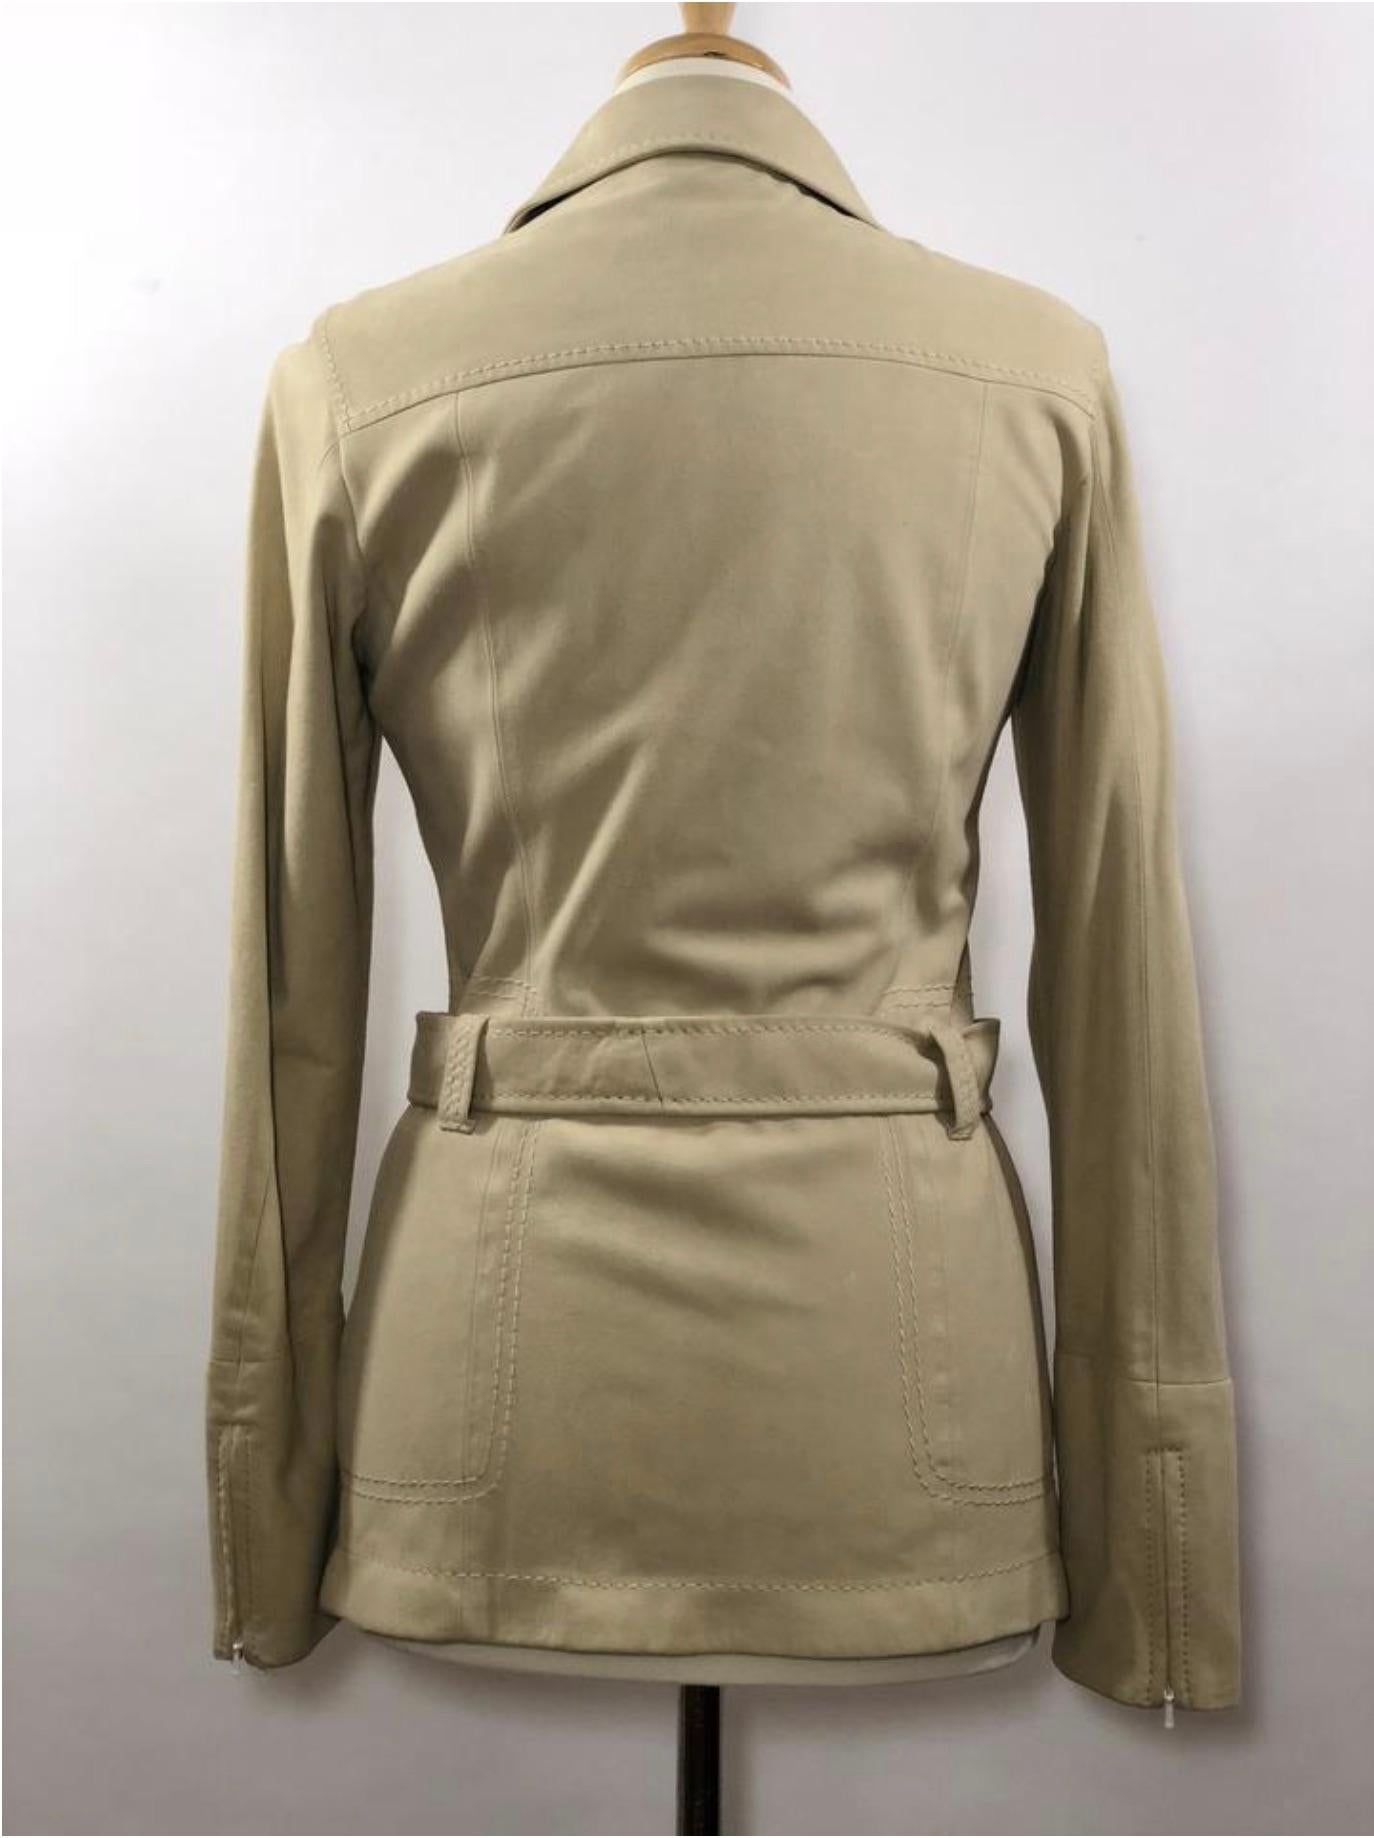 MODEL - Faconnable Goatskin Fall or Spring Jacket with Belt

CONDITION - Exceptional! 

SKU - 2196-FL

ORIGINAL RETAIL PRICE - 595 + tax

SIZE - Small (Euro 36)

MATERIAL - Goatskin

COLOR - Cream

COMES WITH - Belt

MEASUREMENTS - Length 28, Sleeve